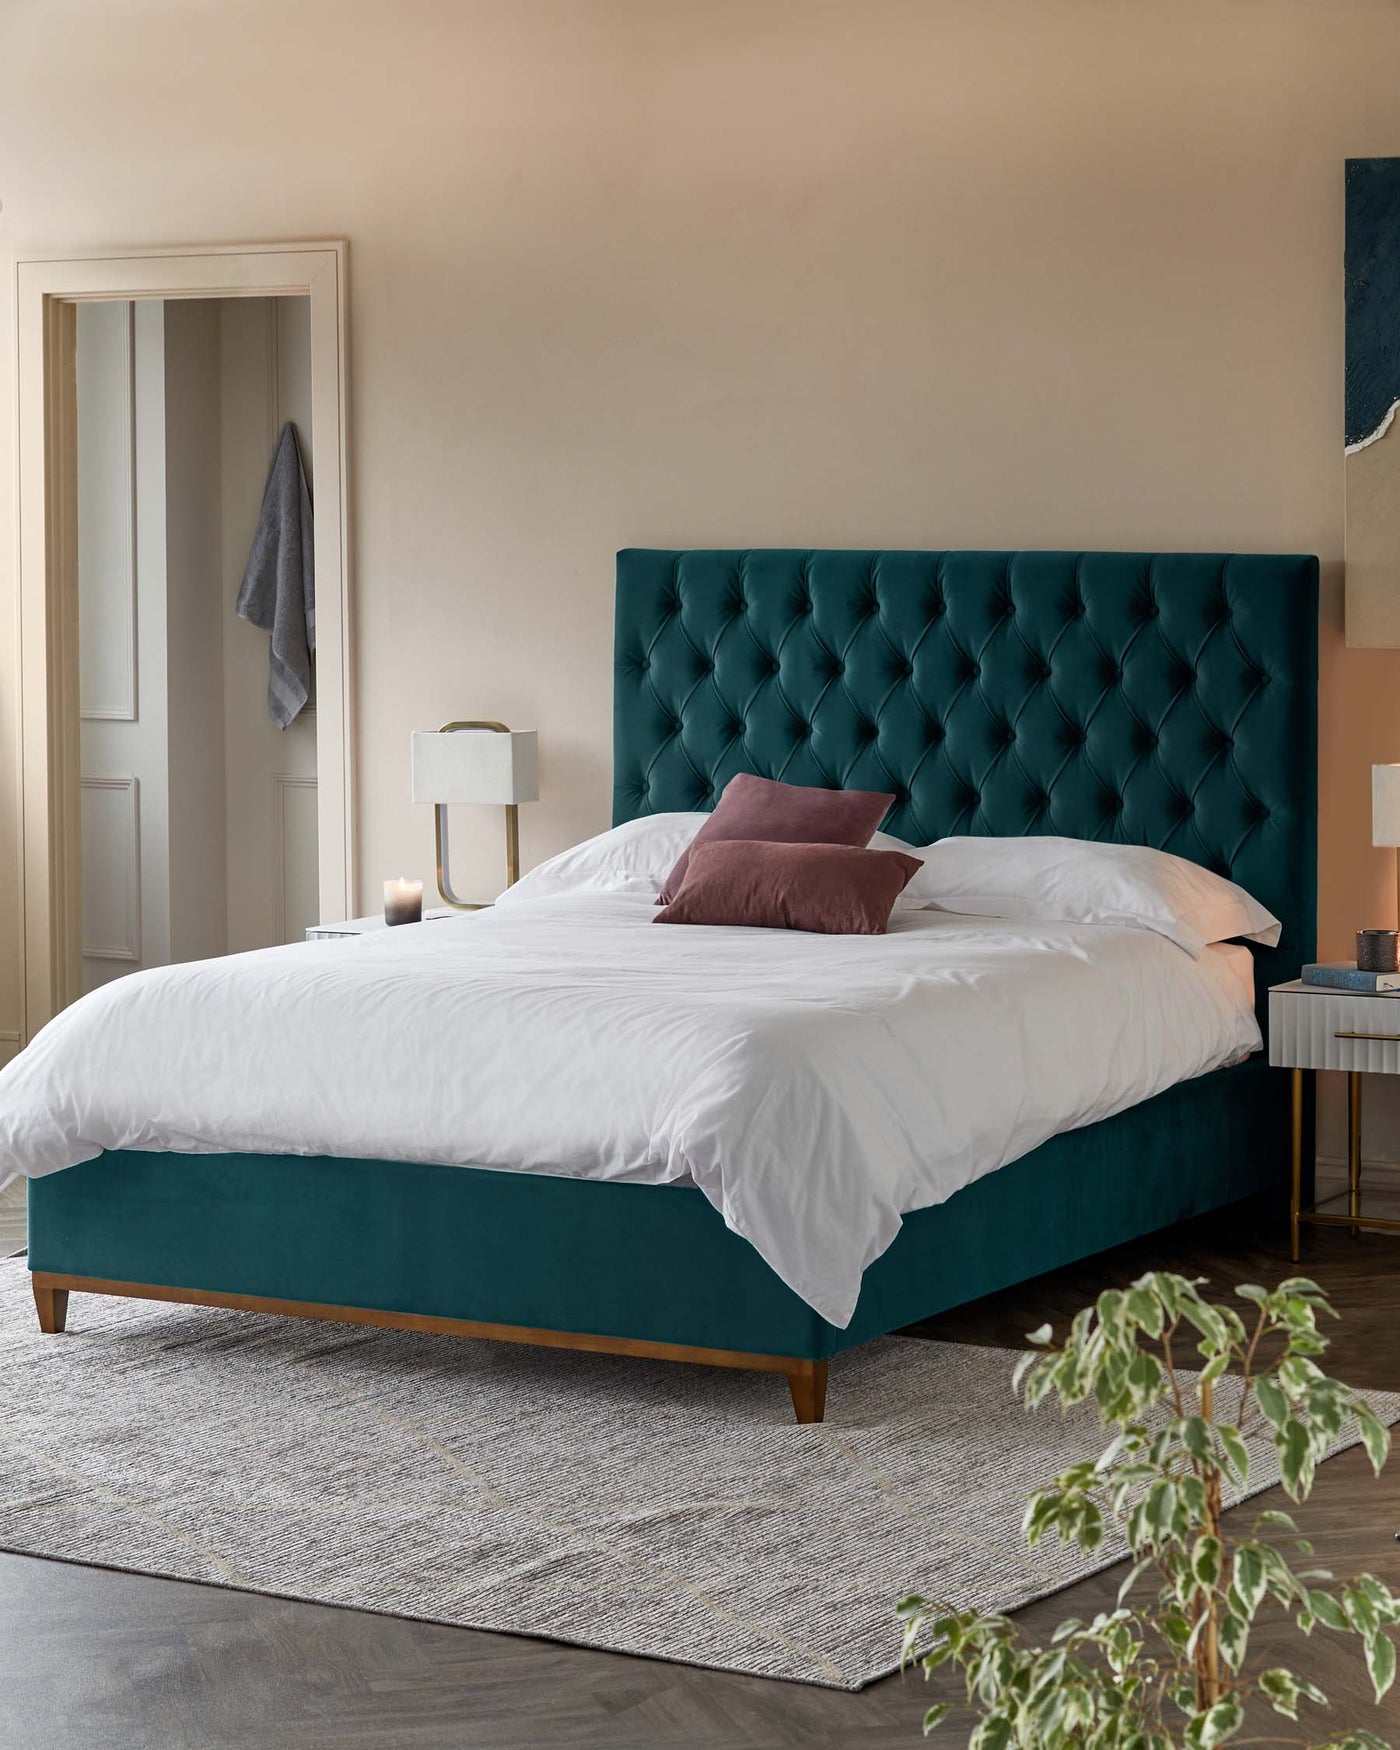 A luxurious teal upholstered king-size bed with a tall, tufted headboard. The bed is dressed in crisp white bedding with a single rose-coloured accent pillow. On the right side of the bed stands a modern bedside table with a white marble top, accented with a gold base. Atop the table sits a white cylindrical table lamp alongside a small decorative item. Below the bed lies a large textured area rug in shades of grey and beige.